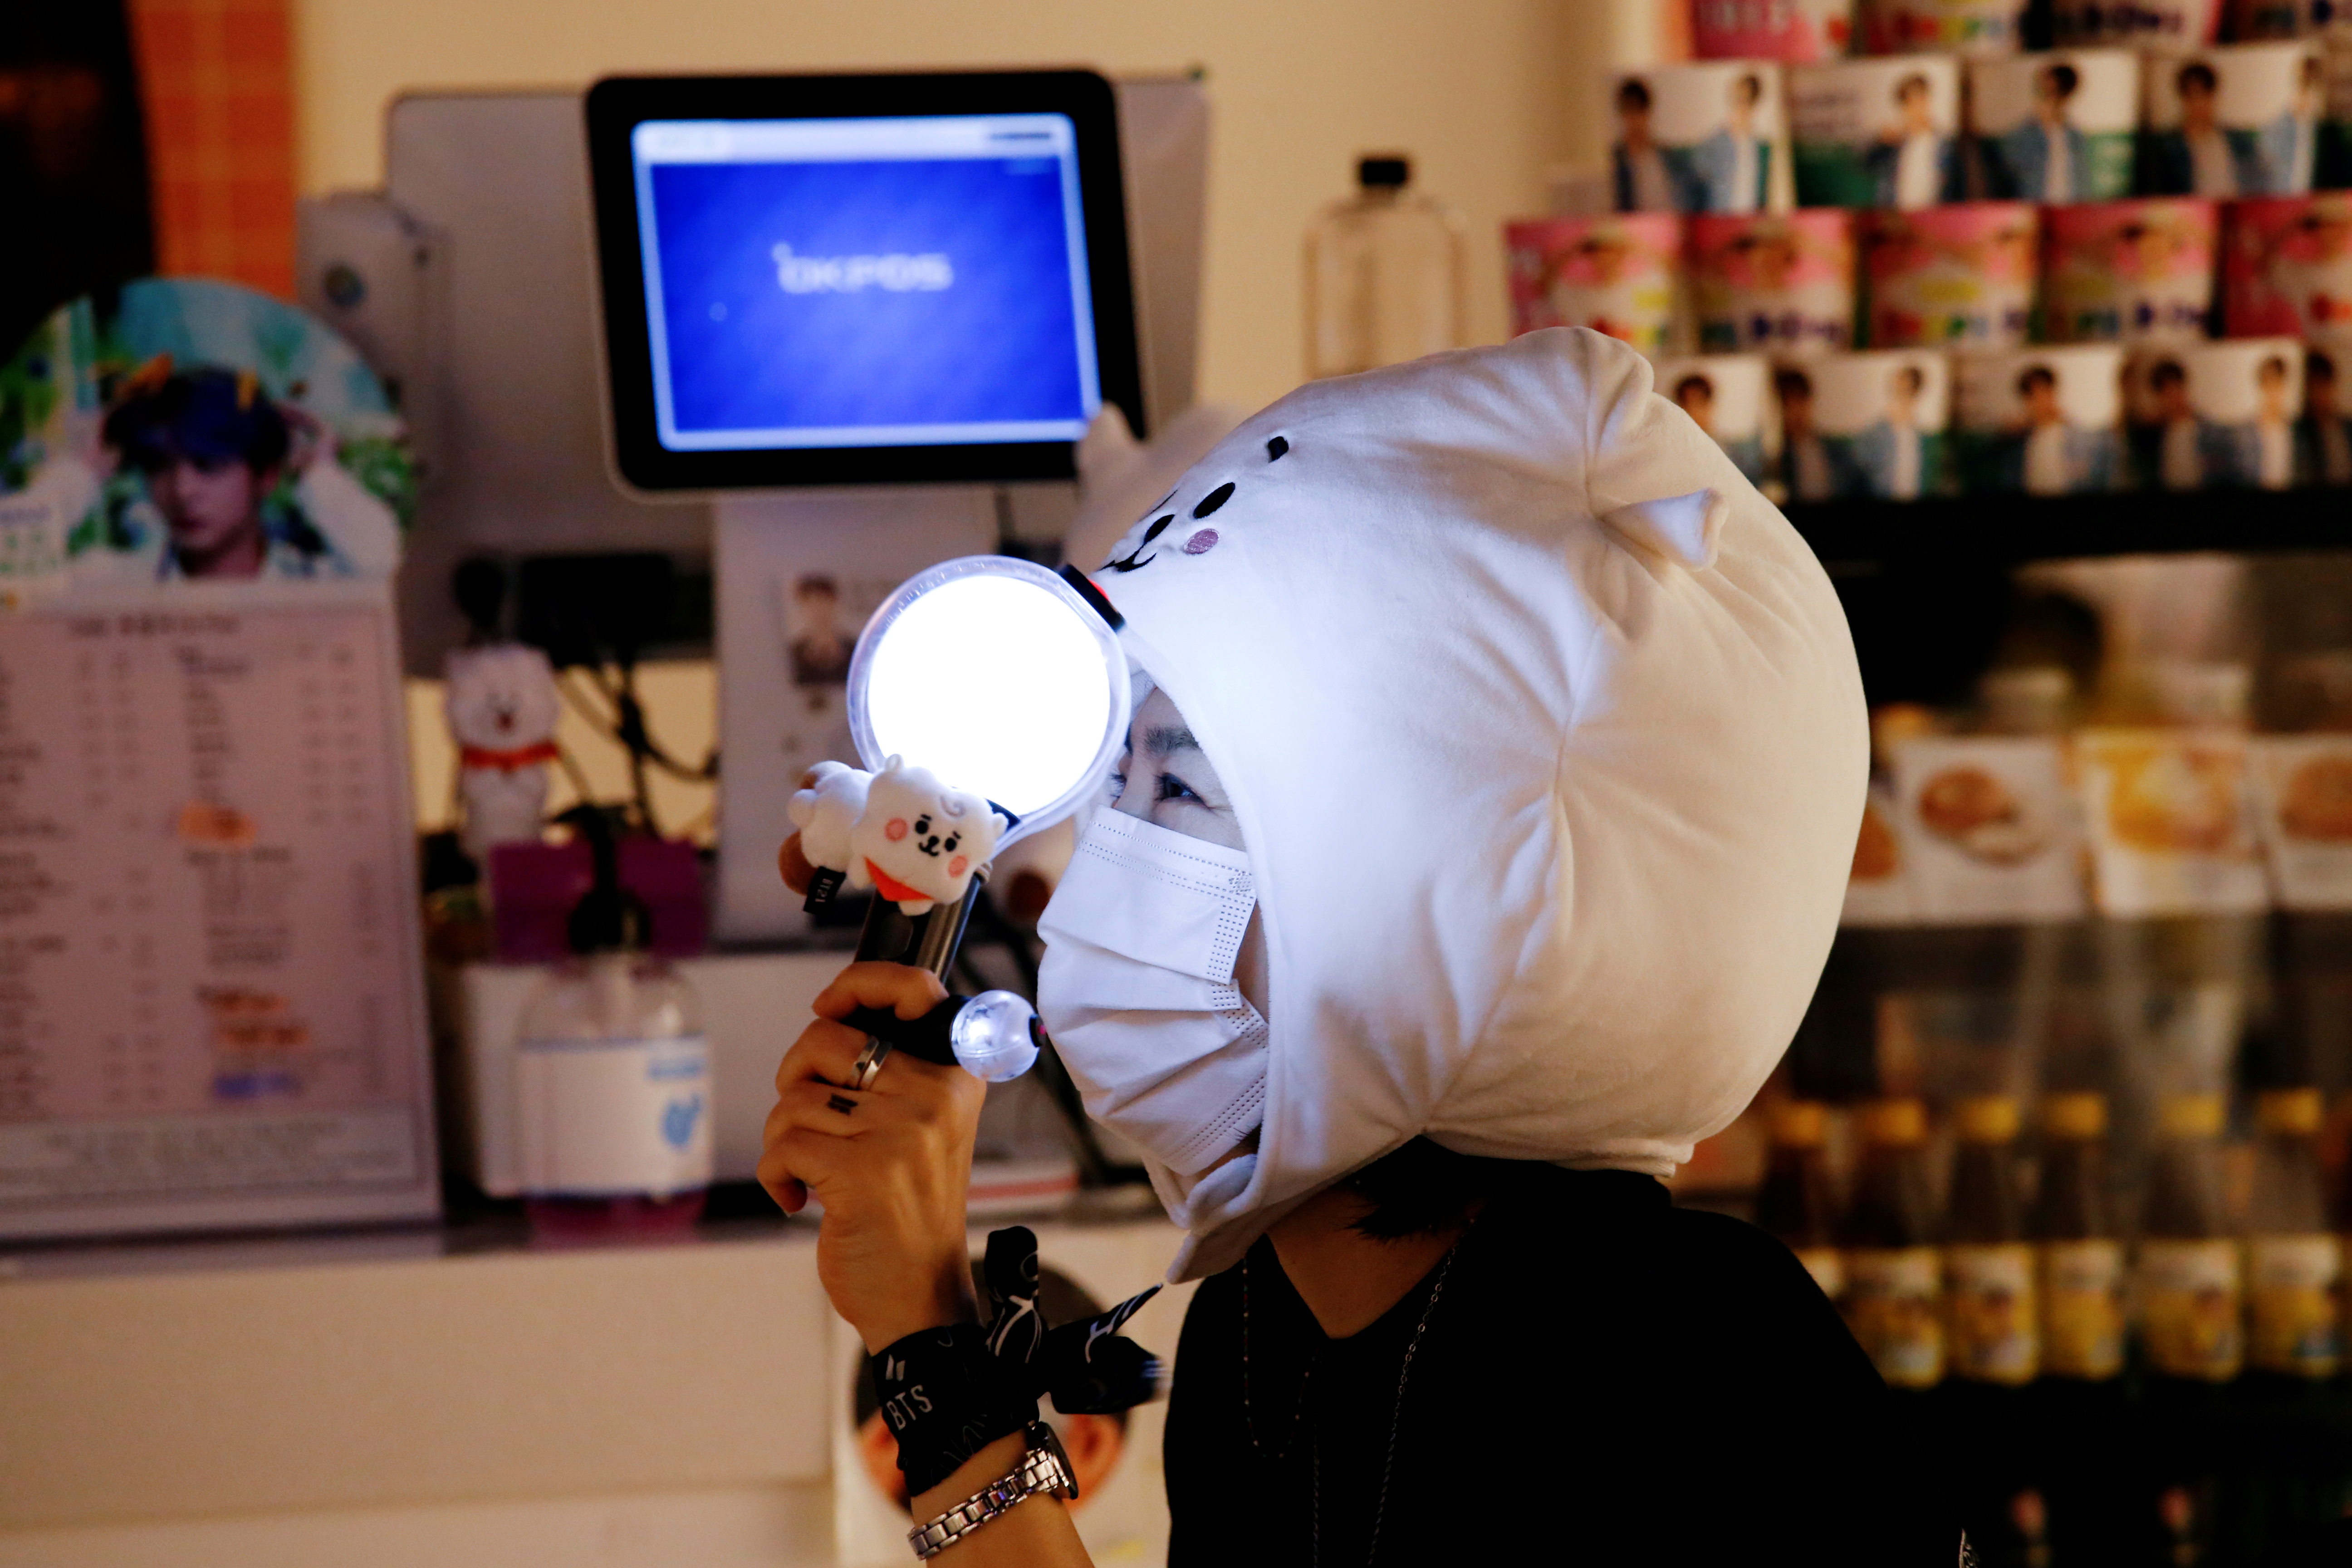 A fan of K-pop idol boy band BTS watches a live streaming online concert, wearing a protective mask at a cafe, in Seoul